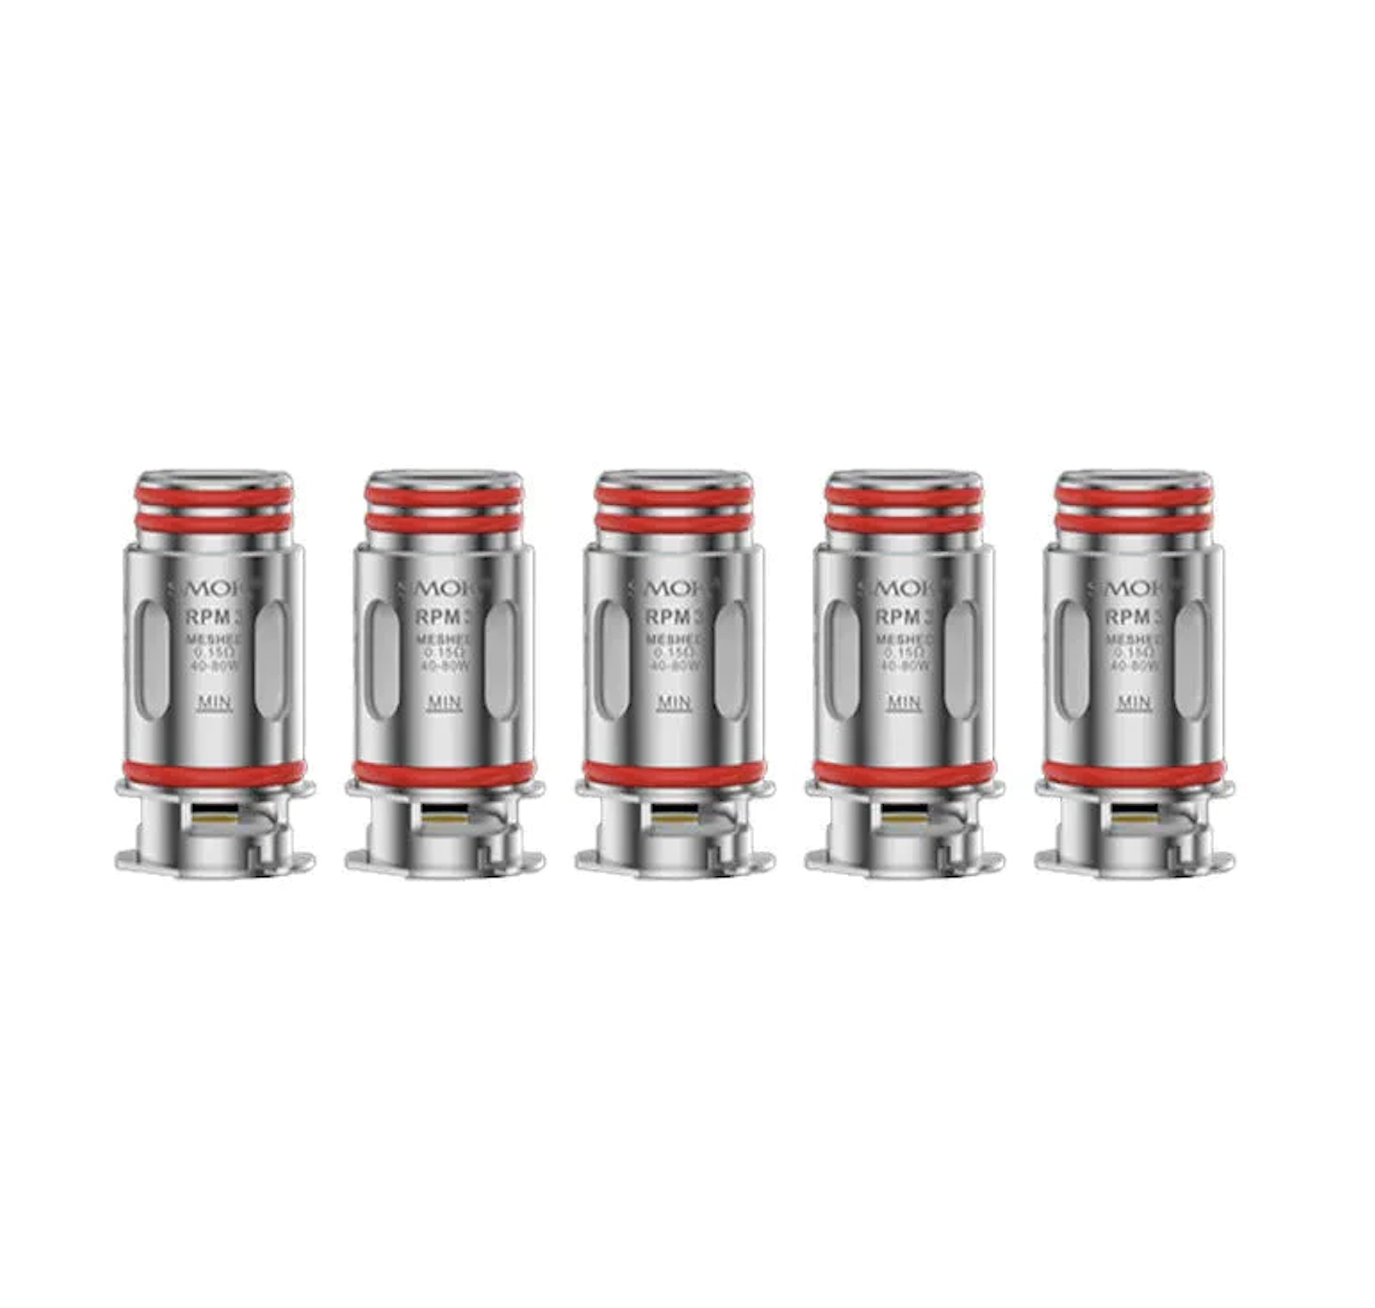 5x SMOK RPM 3 Meshed Coil 0.15 Ohm